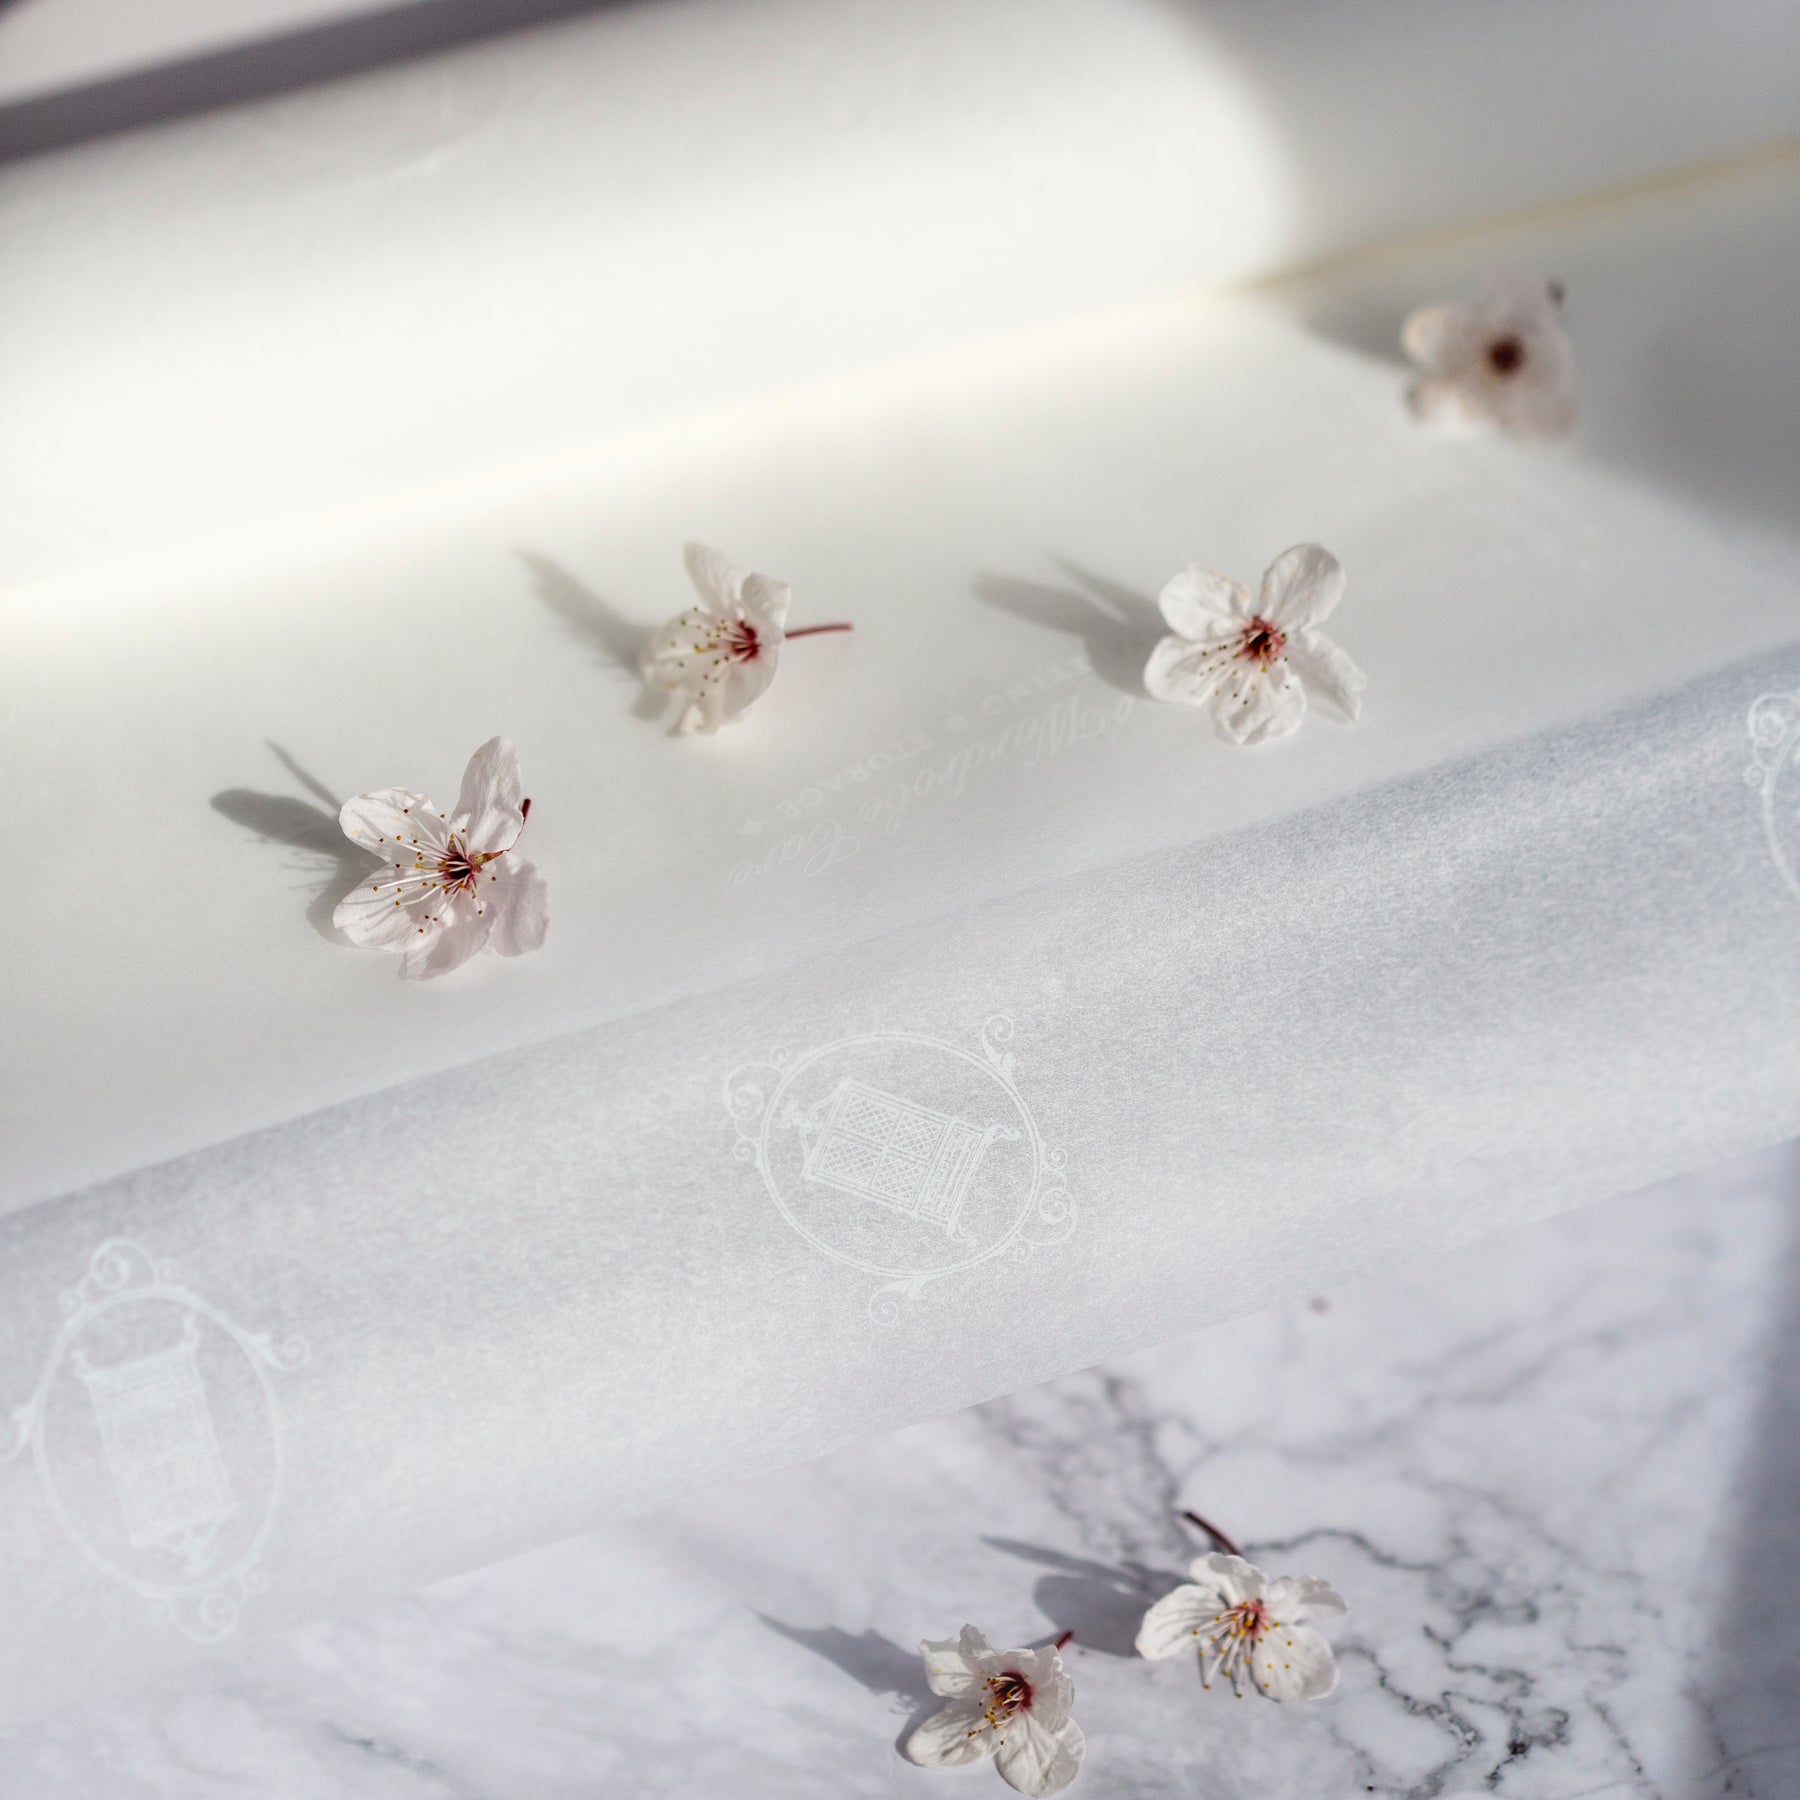 Acid-free tissue paper with Total Wardrobe Care branding on sheet and 4 cherry blossom flowers lined out